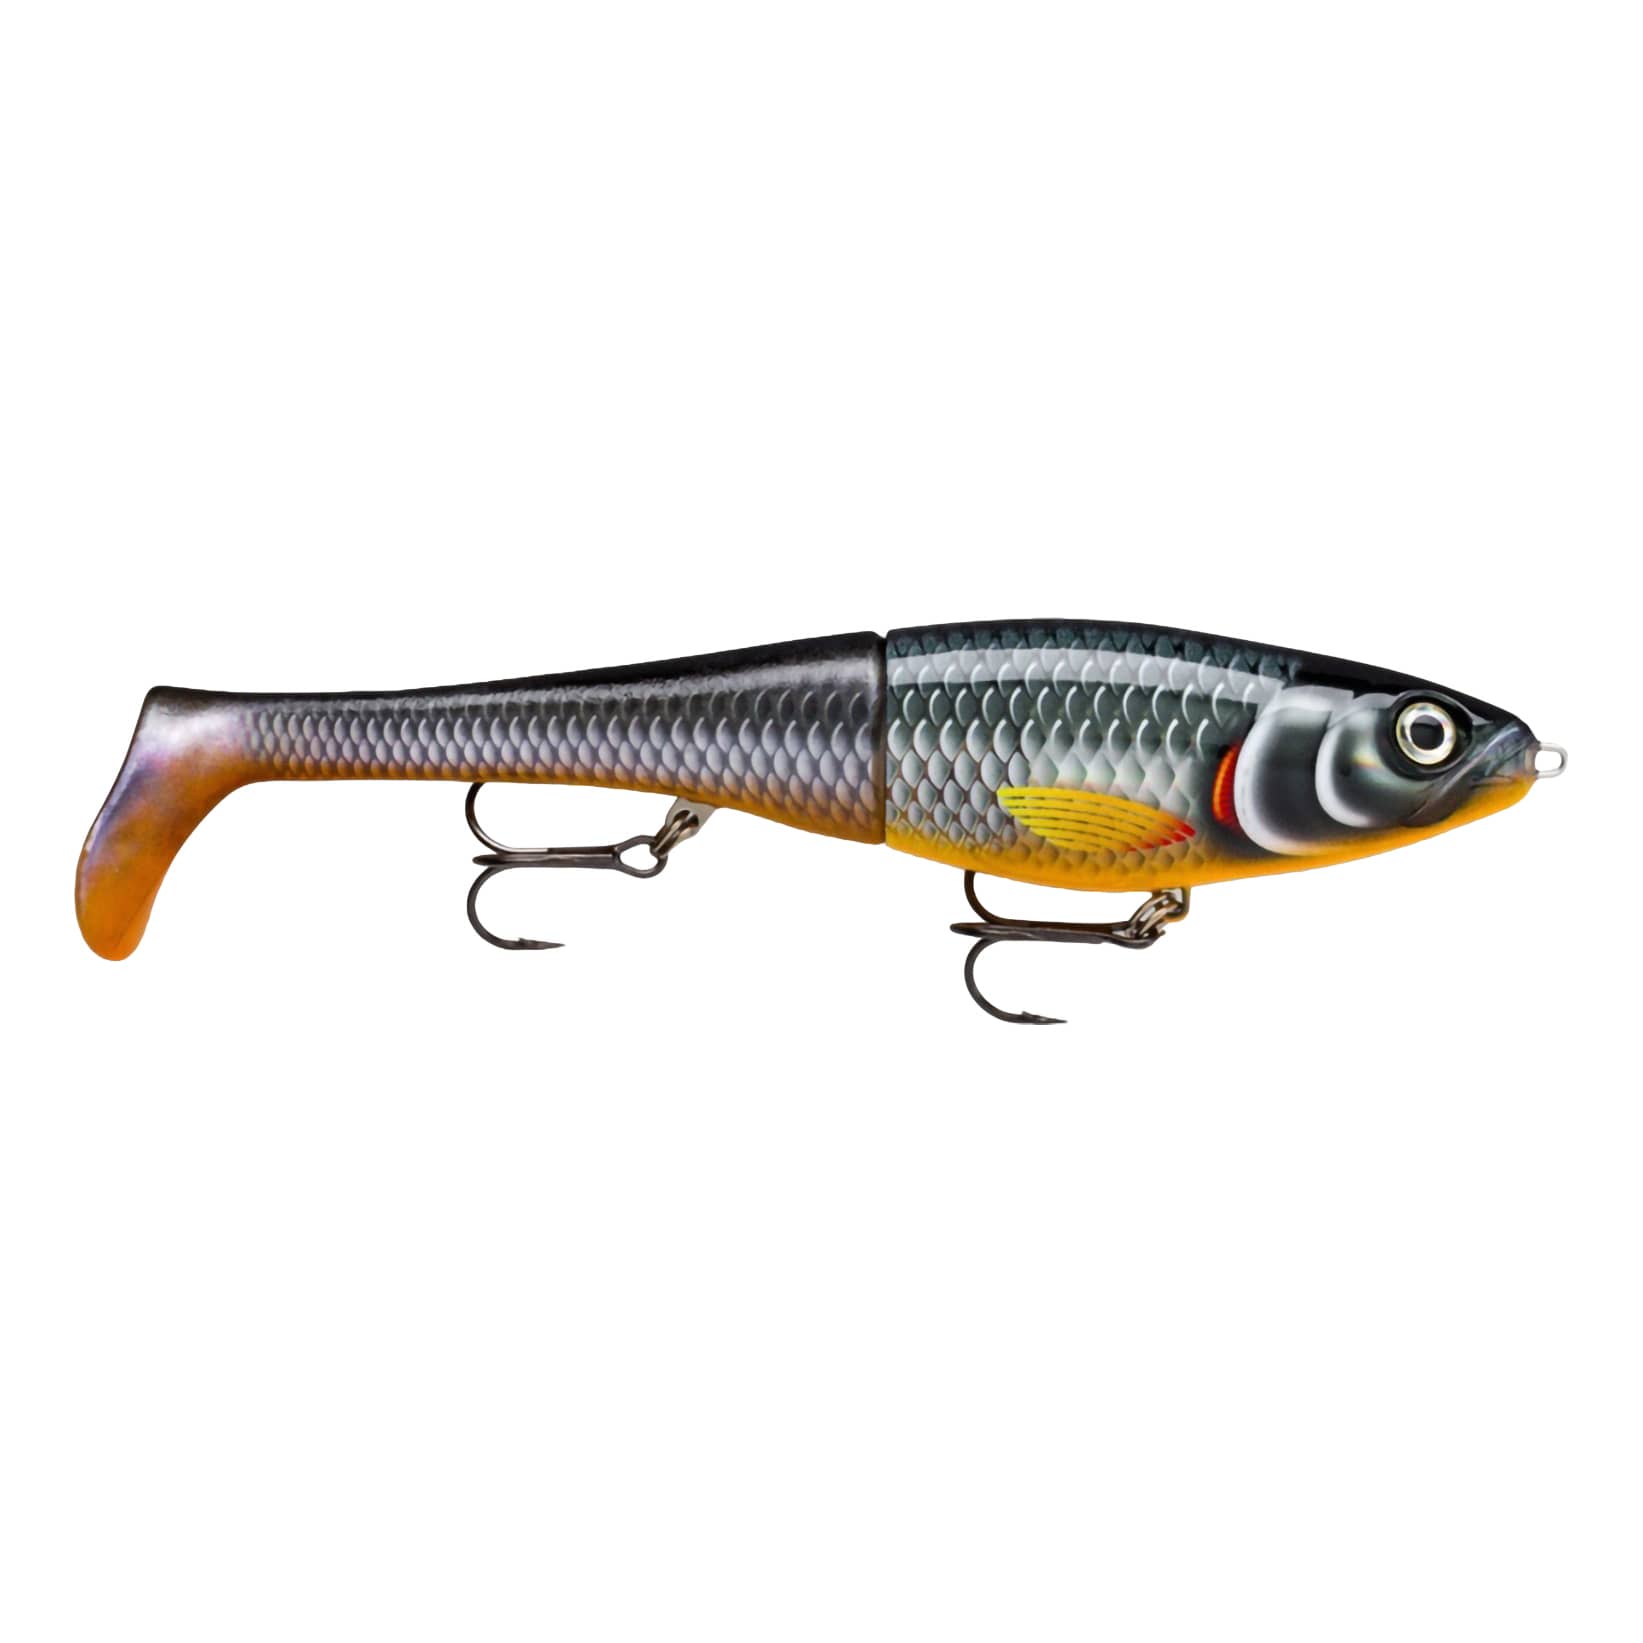 Johnny's Pond - Rapala X-Rap Jointed Shad, freshwater lure